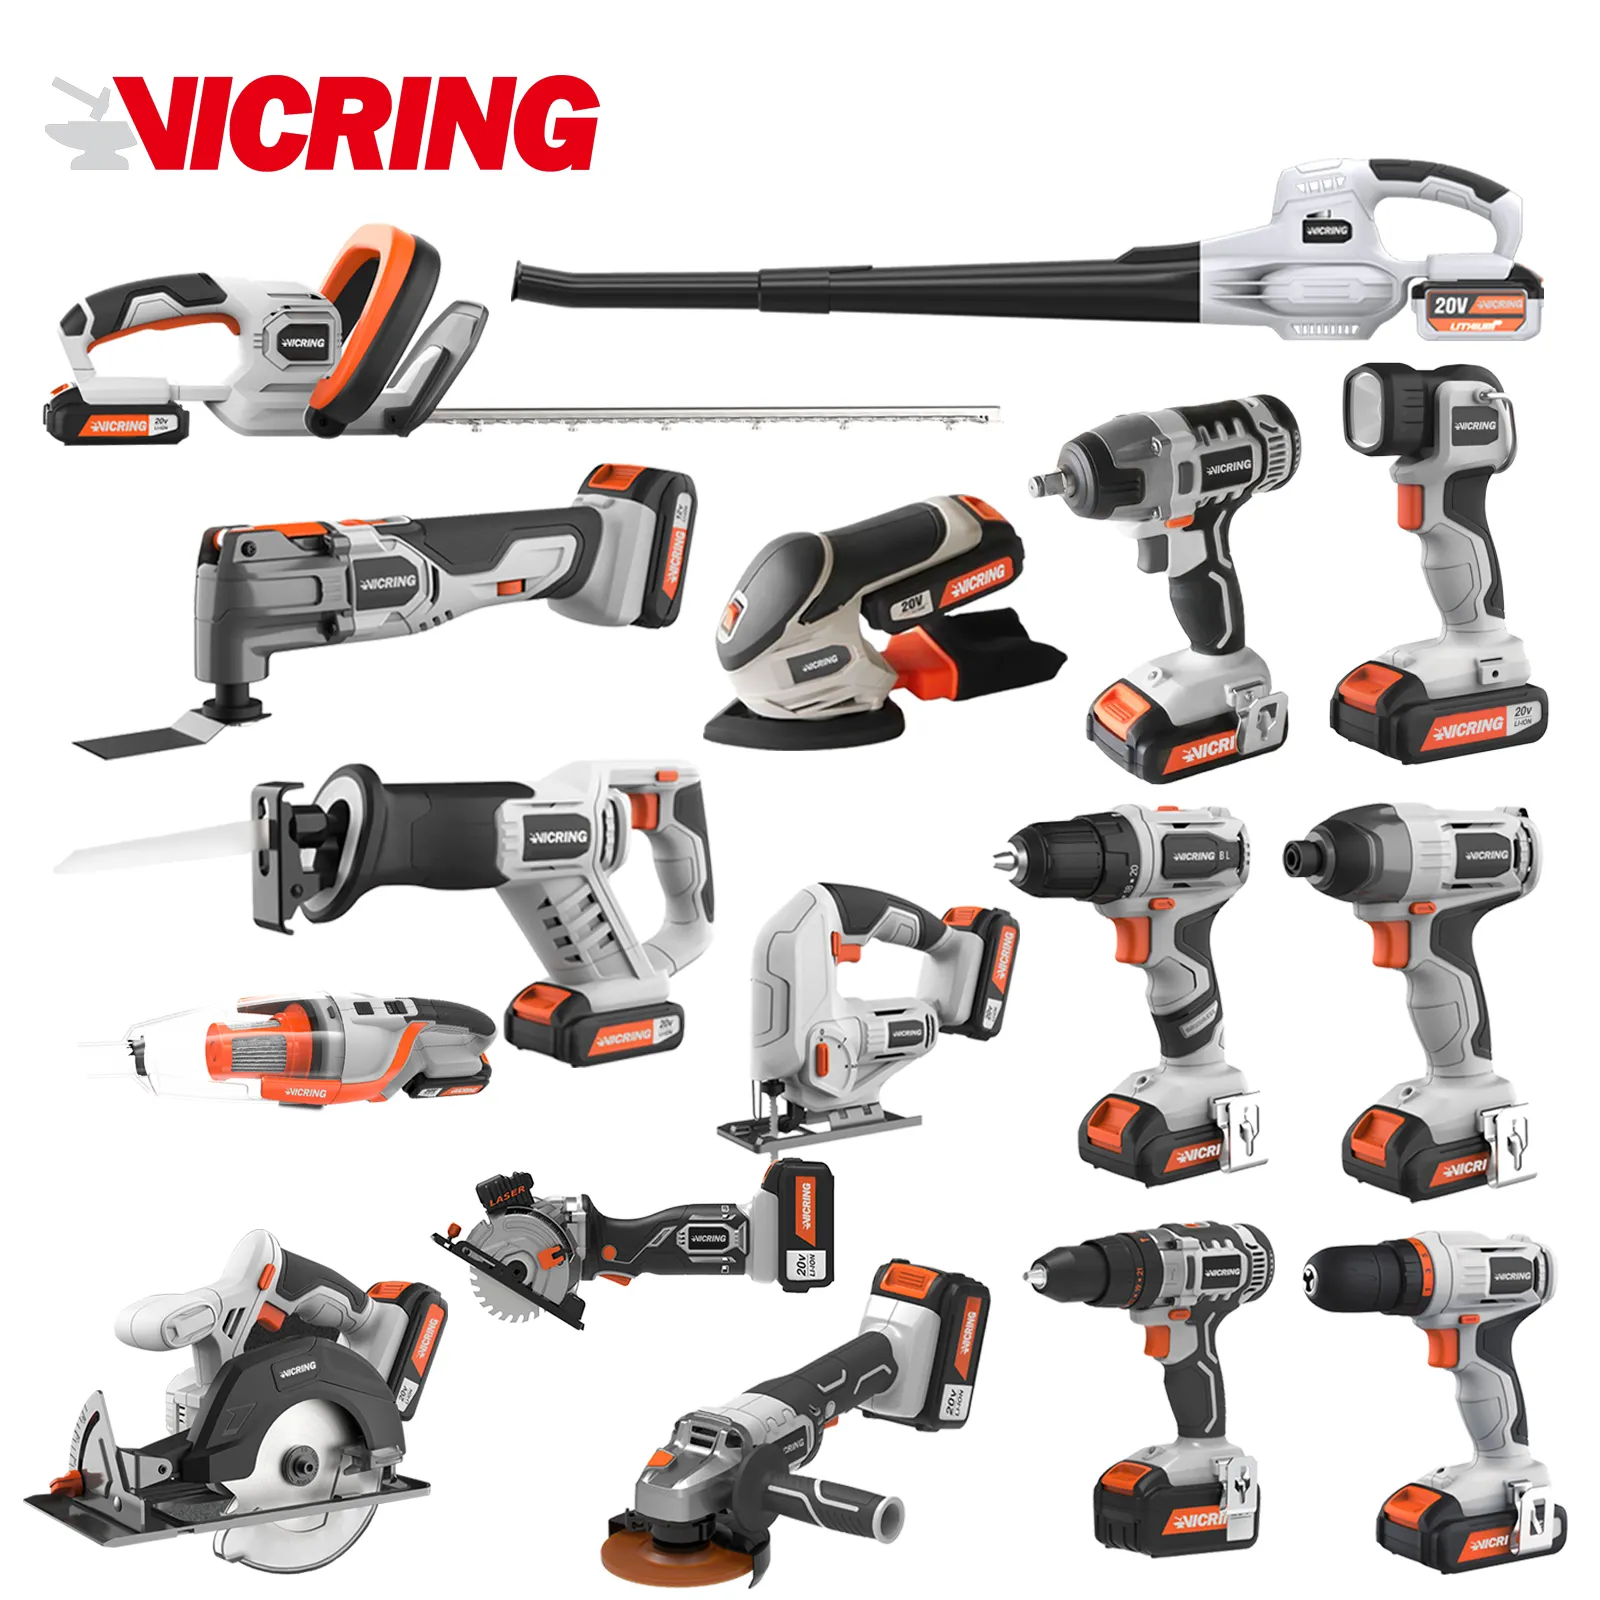 VICRING Hot Sale !!!New Stock For Tools Set Lithium-ion 16Pcs Cordless Power Tools Combo Kit Easy-to-use